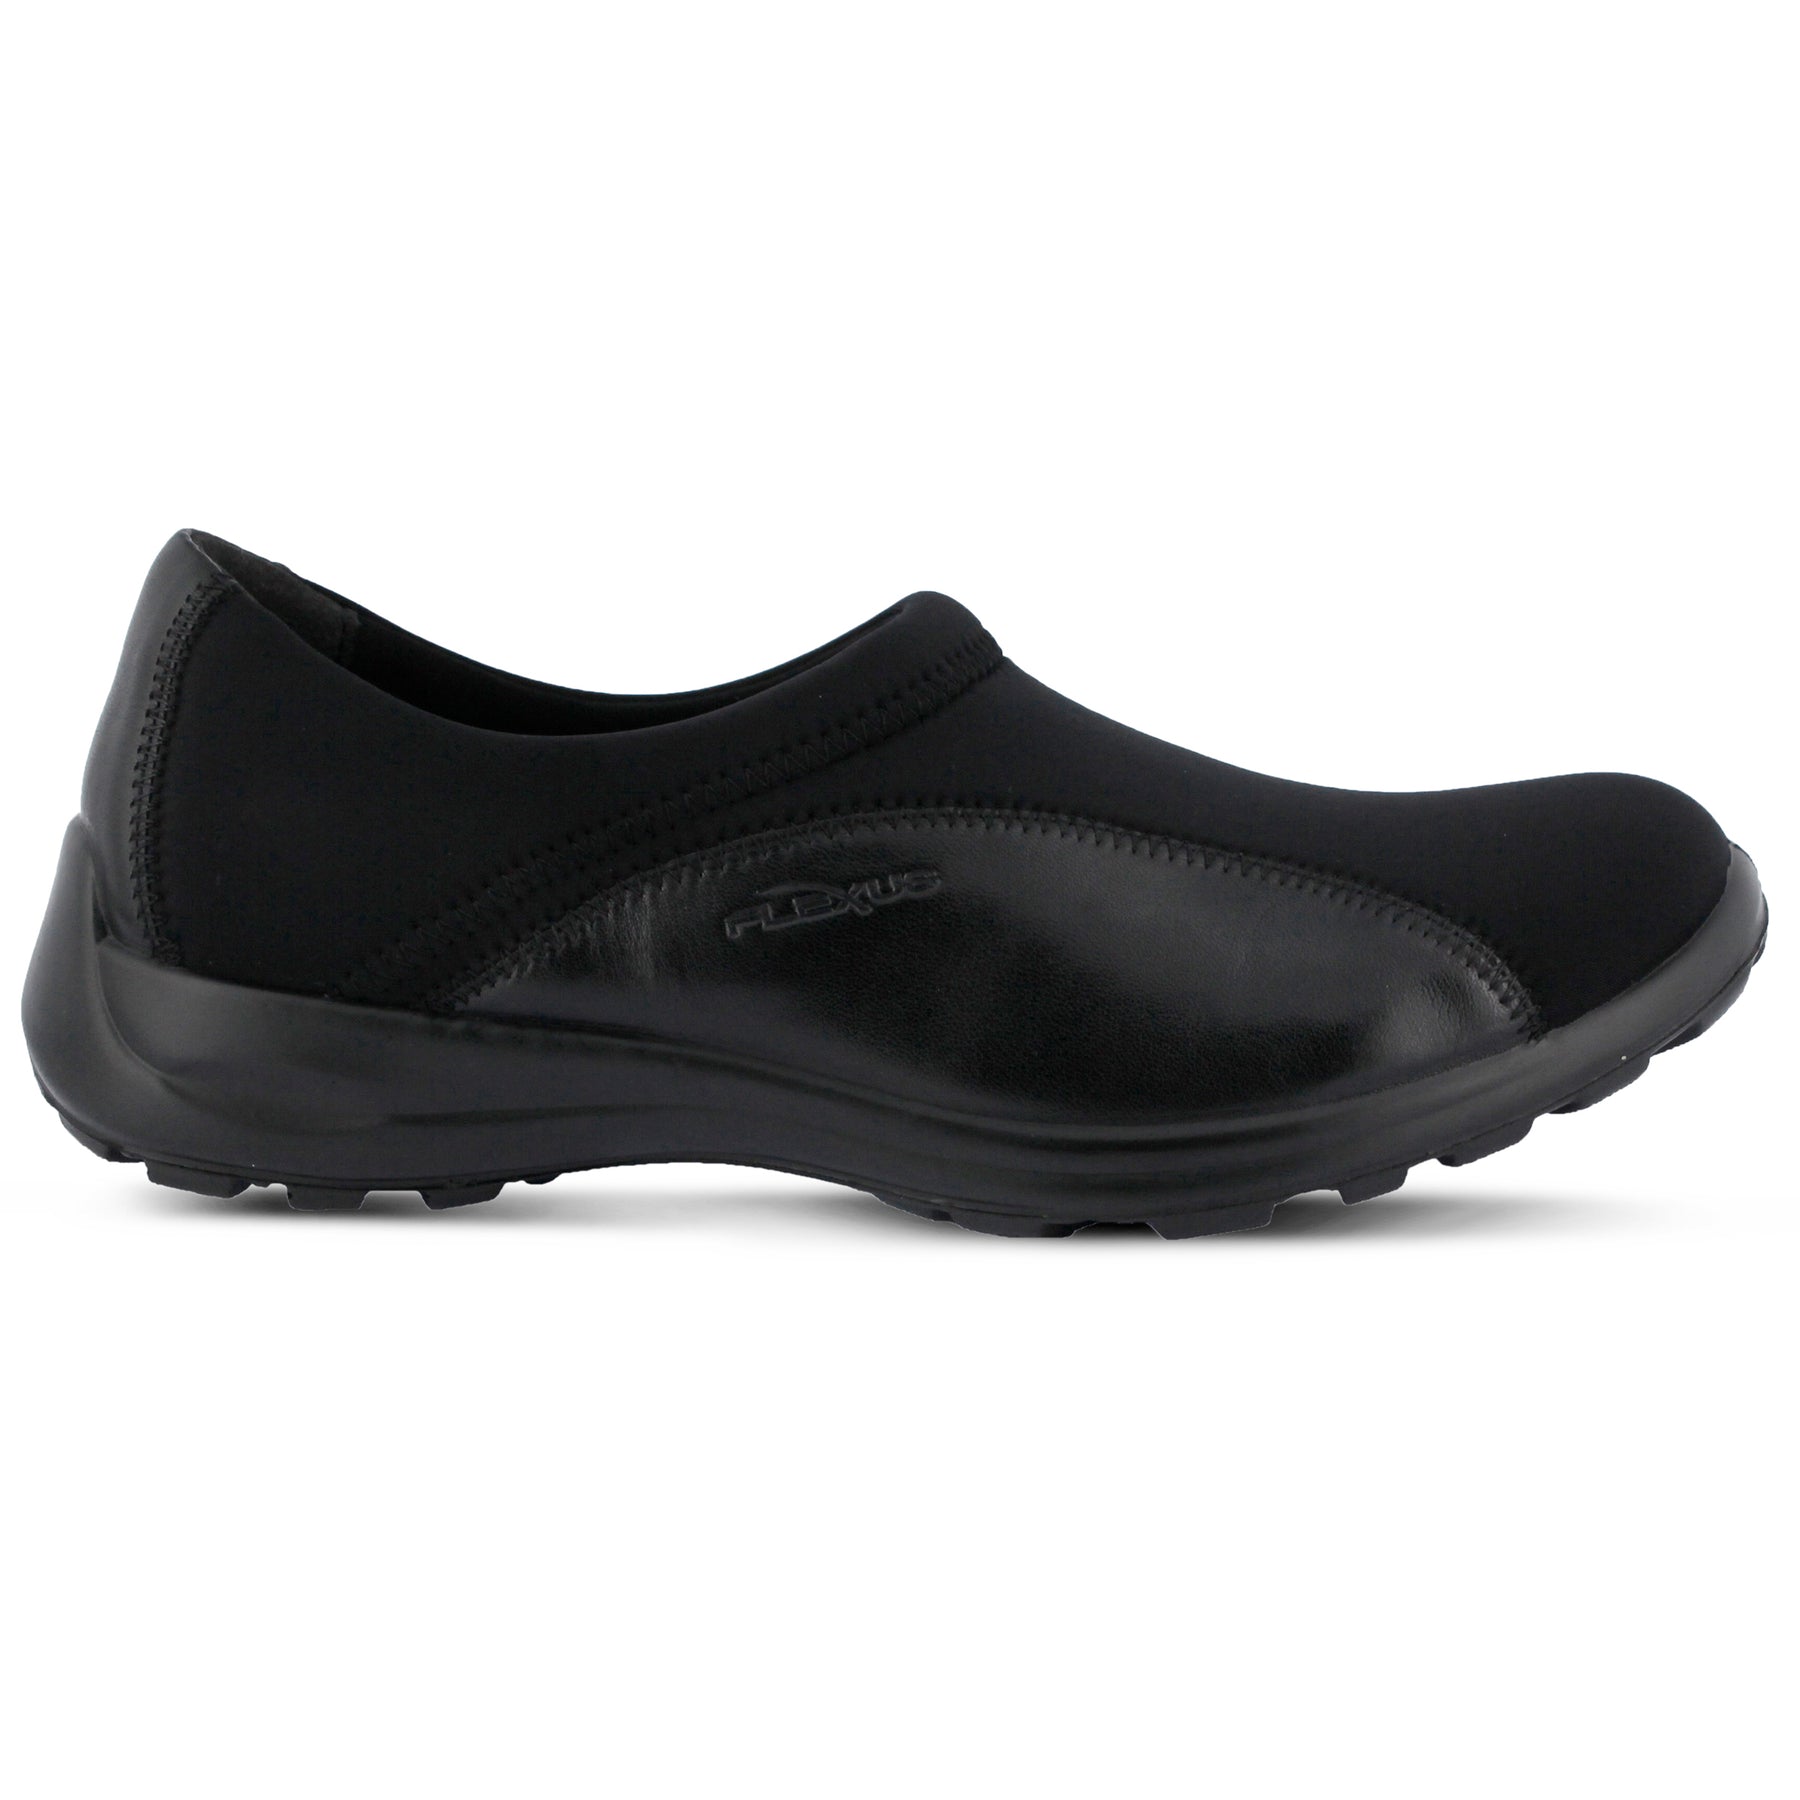 BLACK WILLOW SLIP-ON SHOE by FLEXUS – Spring Step Shoes